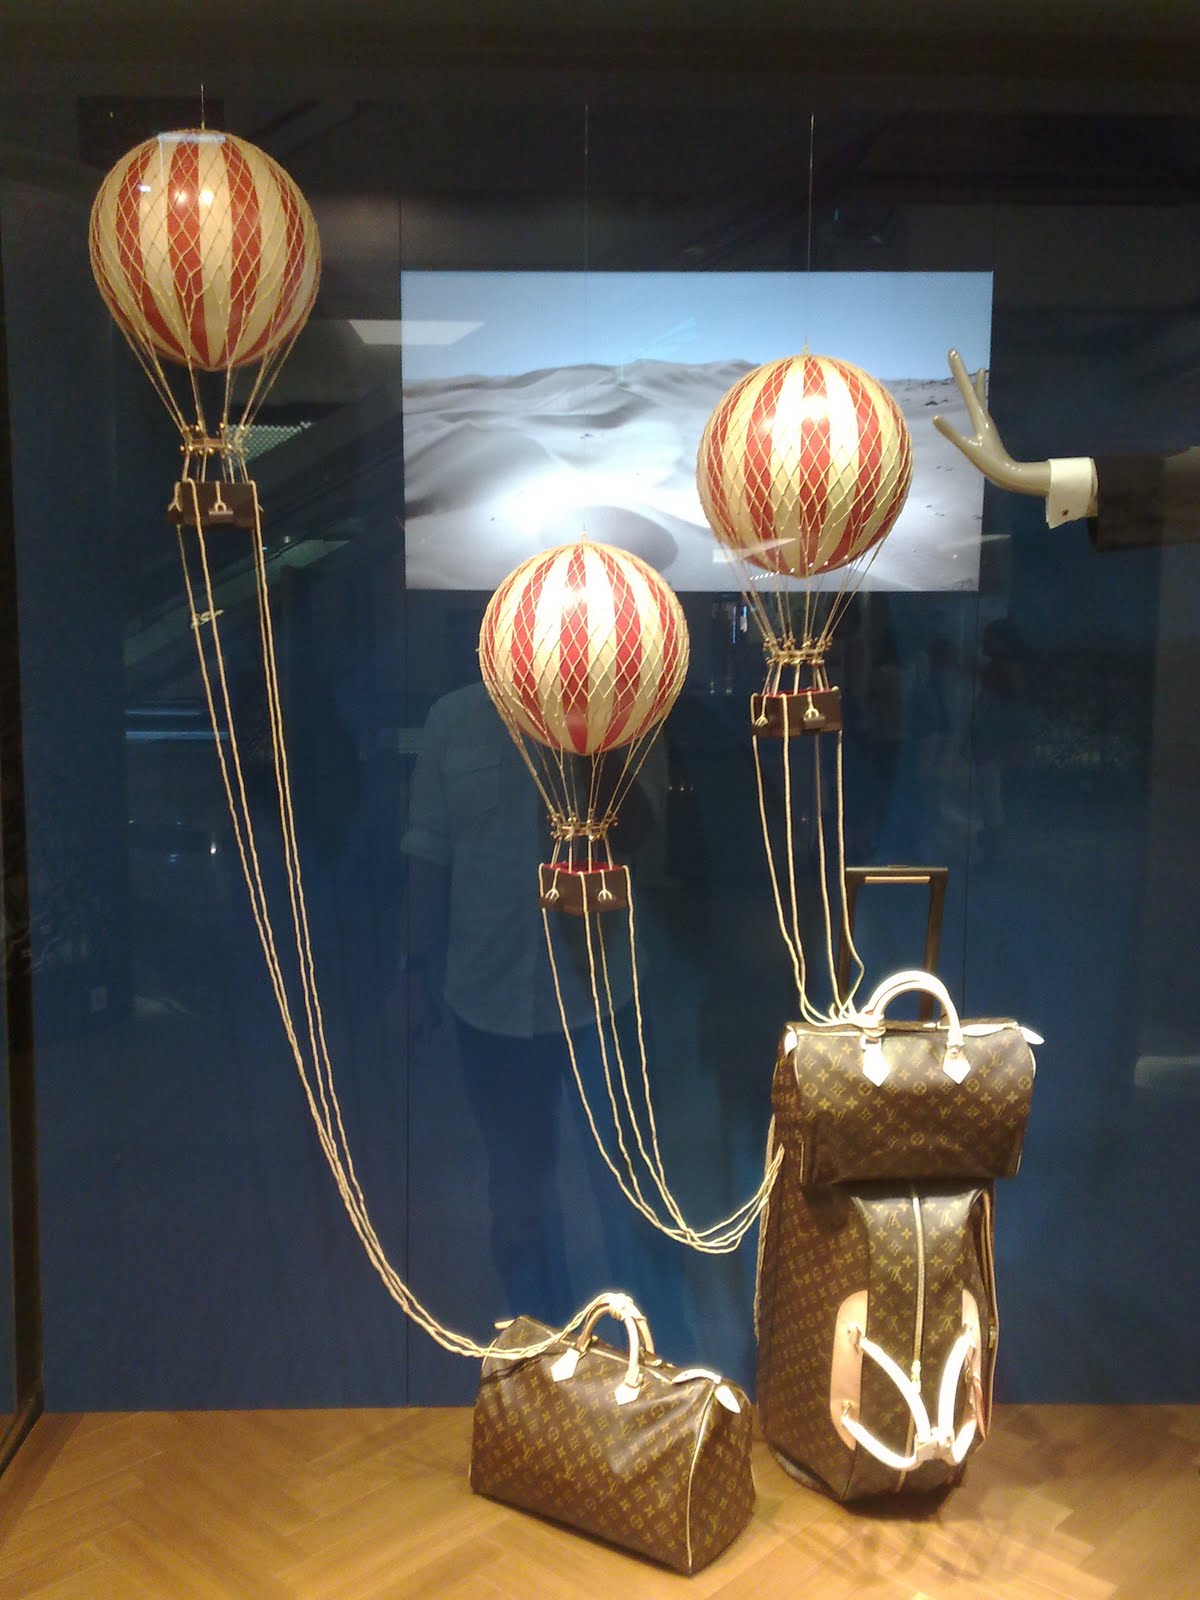 displayhunter: Louis Vuitton: Hot balloons and the sea